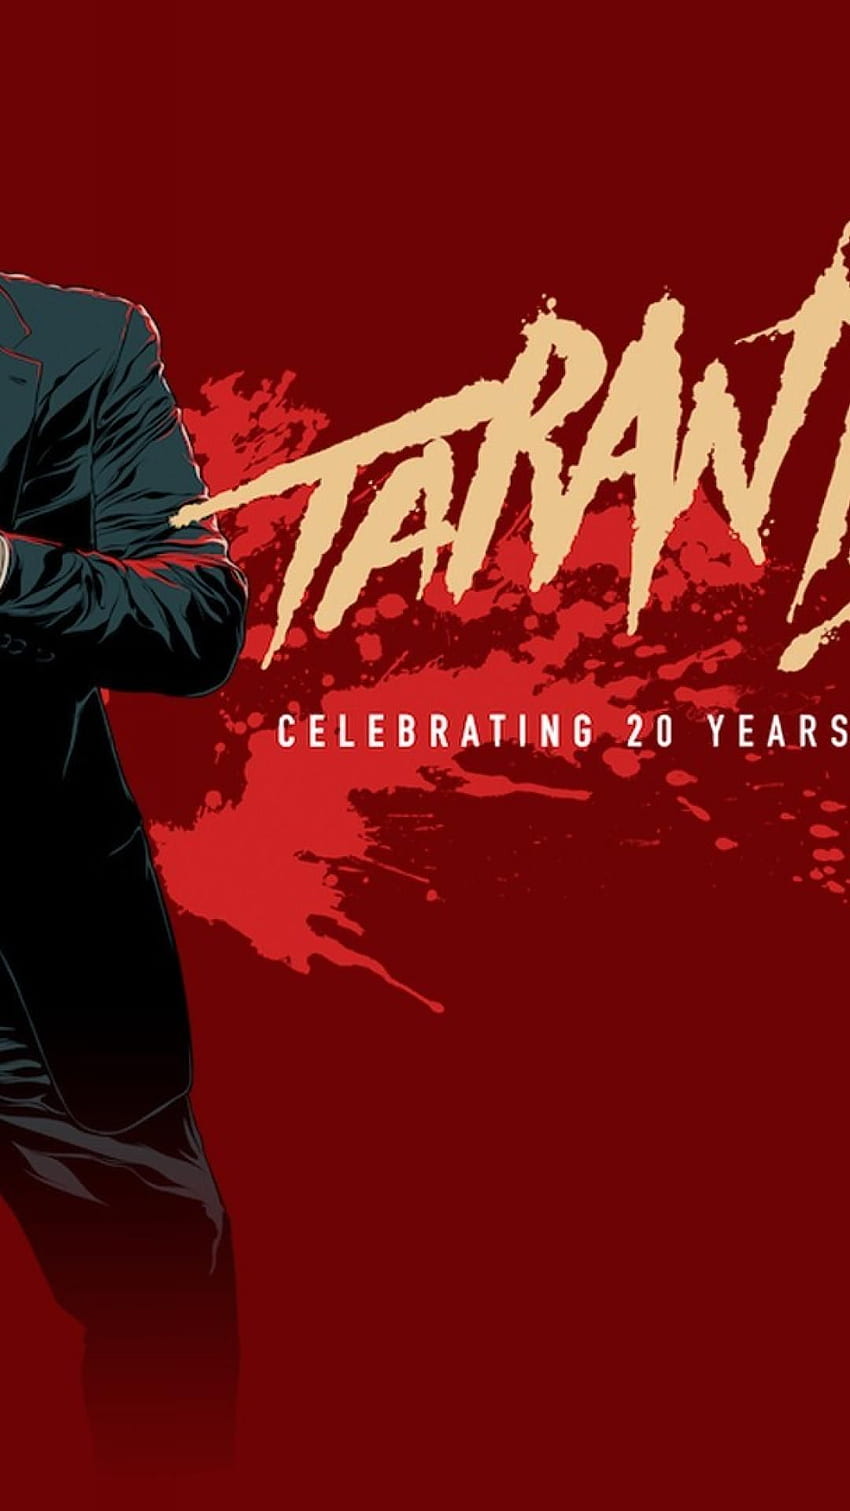 Decorate Your Desktop with These New Django Unchained Character Wallpapers   Fandango